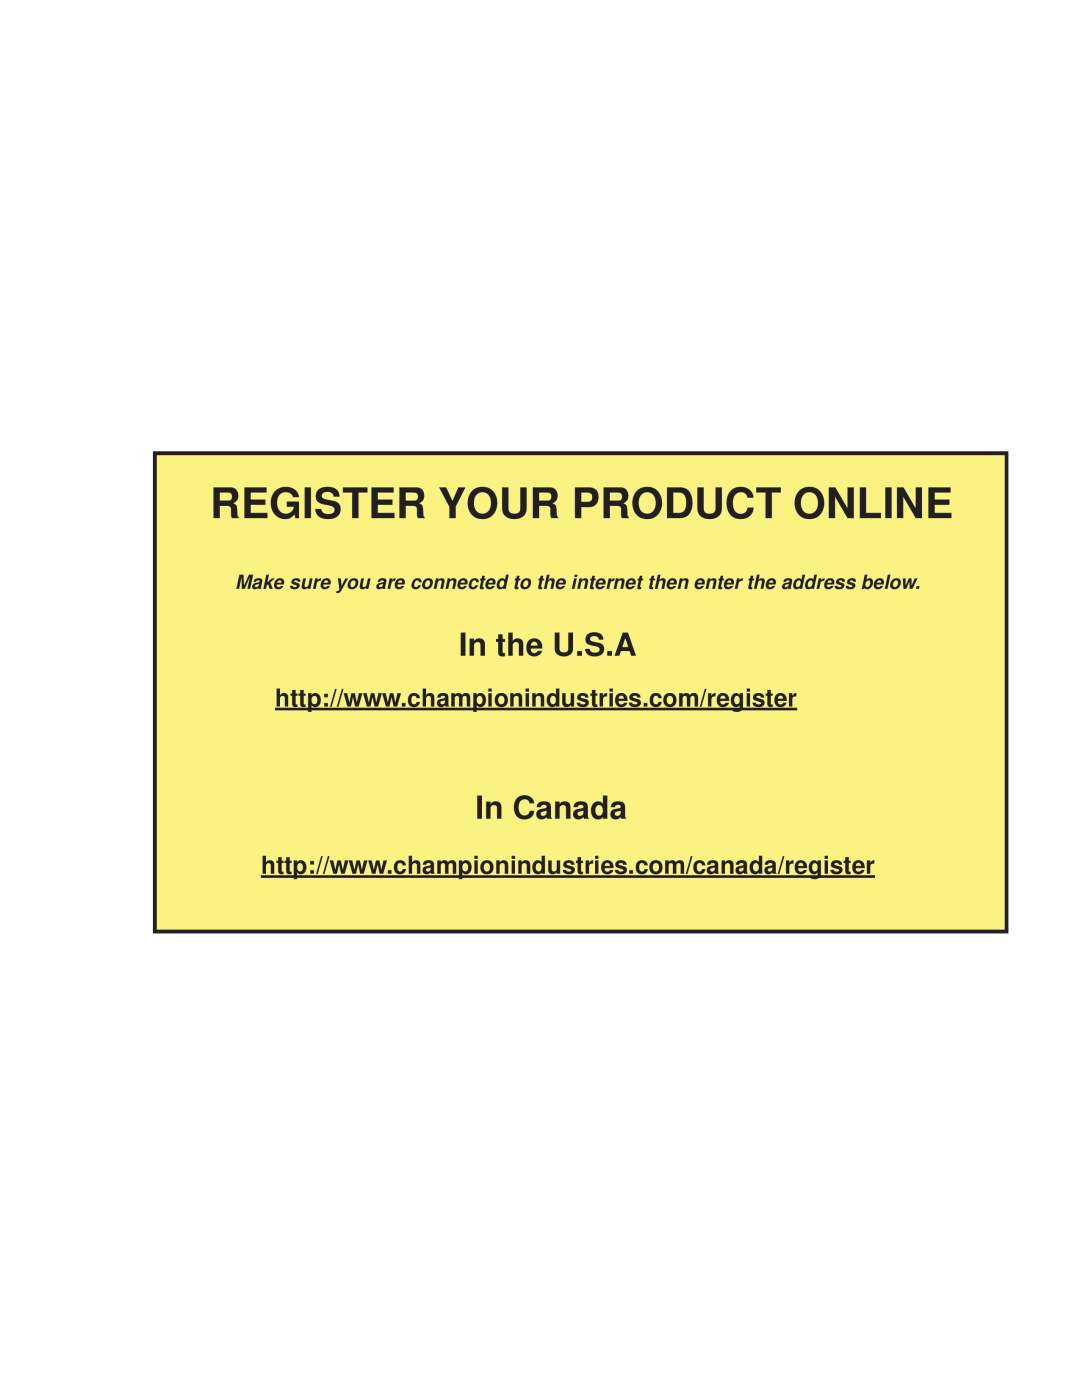 GE DH2000 operation manual In the U.S.A, In Canada, Register Your Product Online 